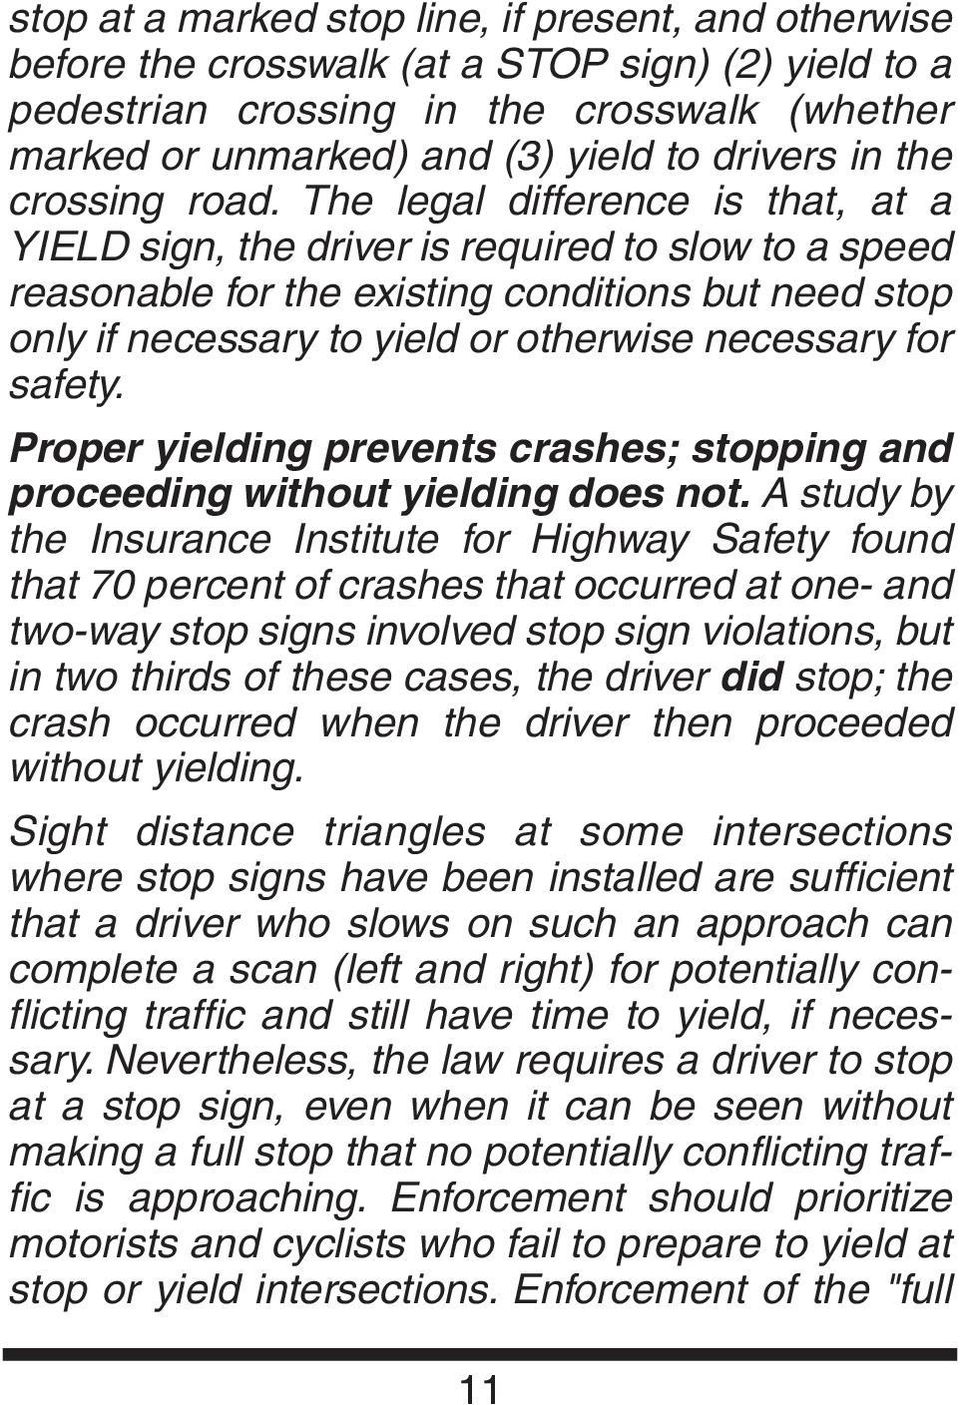 The legal difference is that, at a YIELD sign, the driver is required to slow to a speed reasonable for the existing conditions but need stop only if necessary to yield or otherwise necessary for